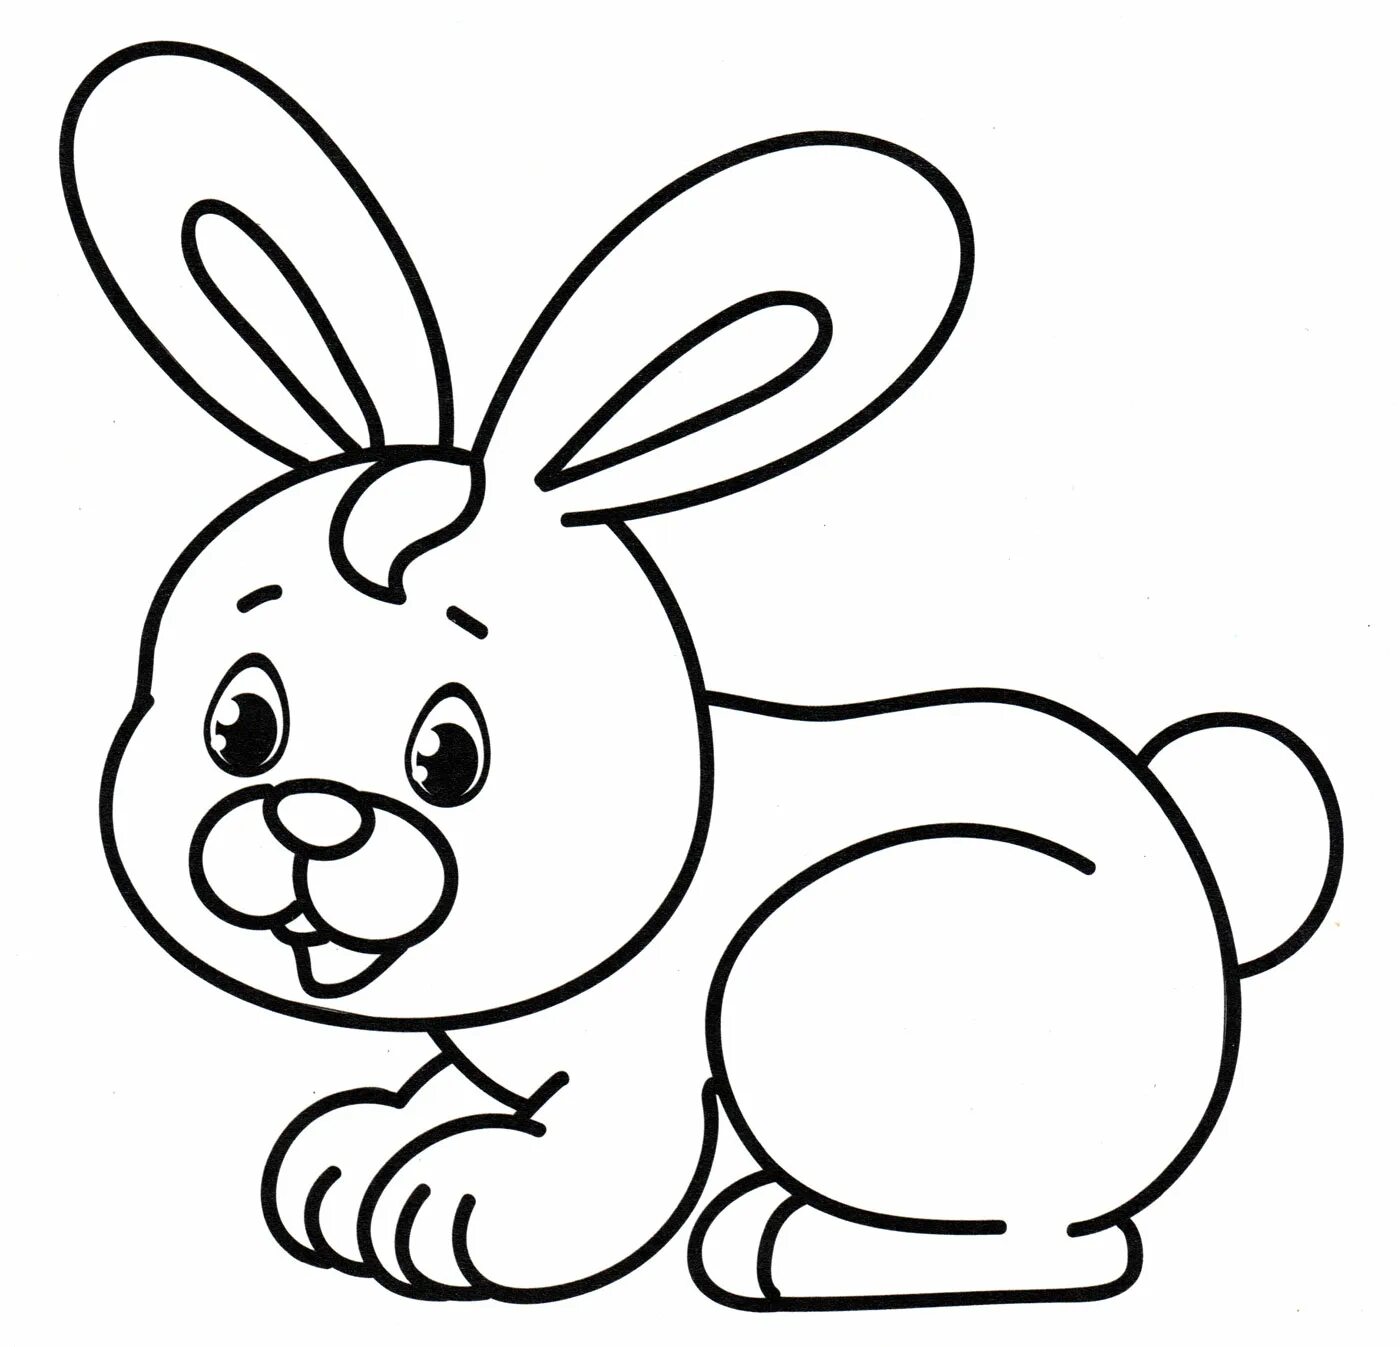 A wonderful bunny coloring book for kids